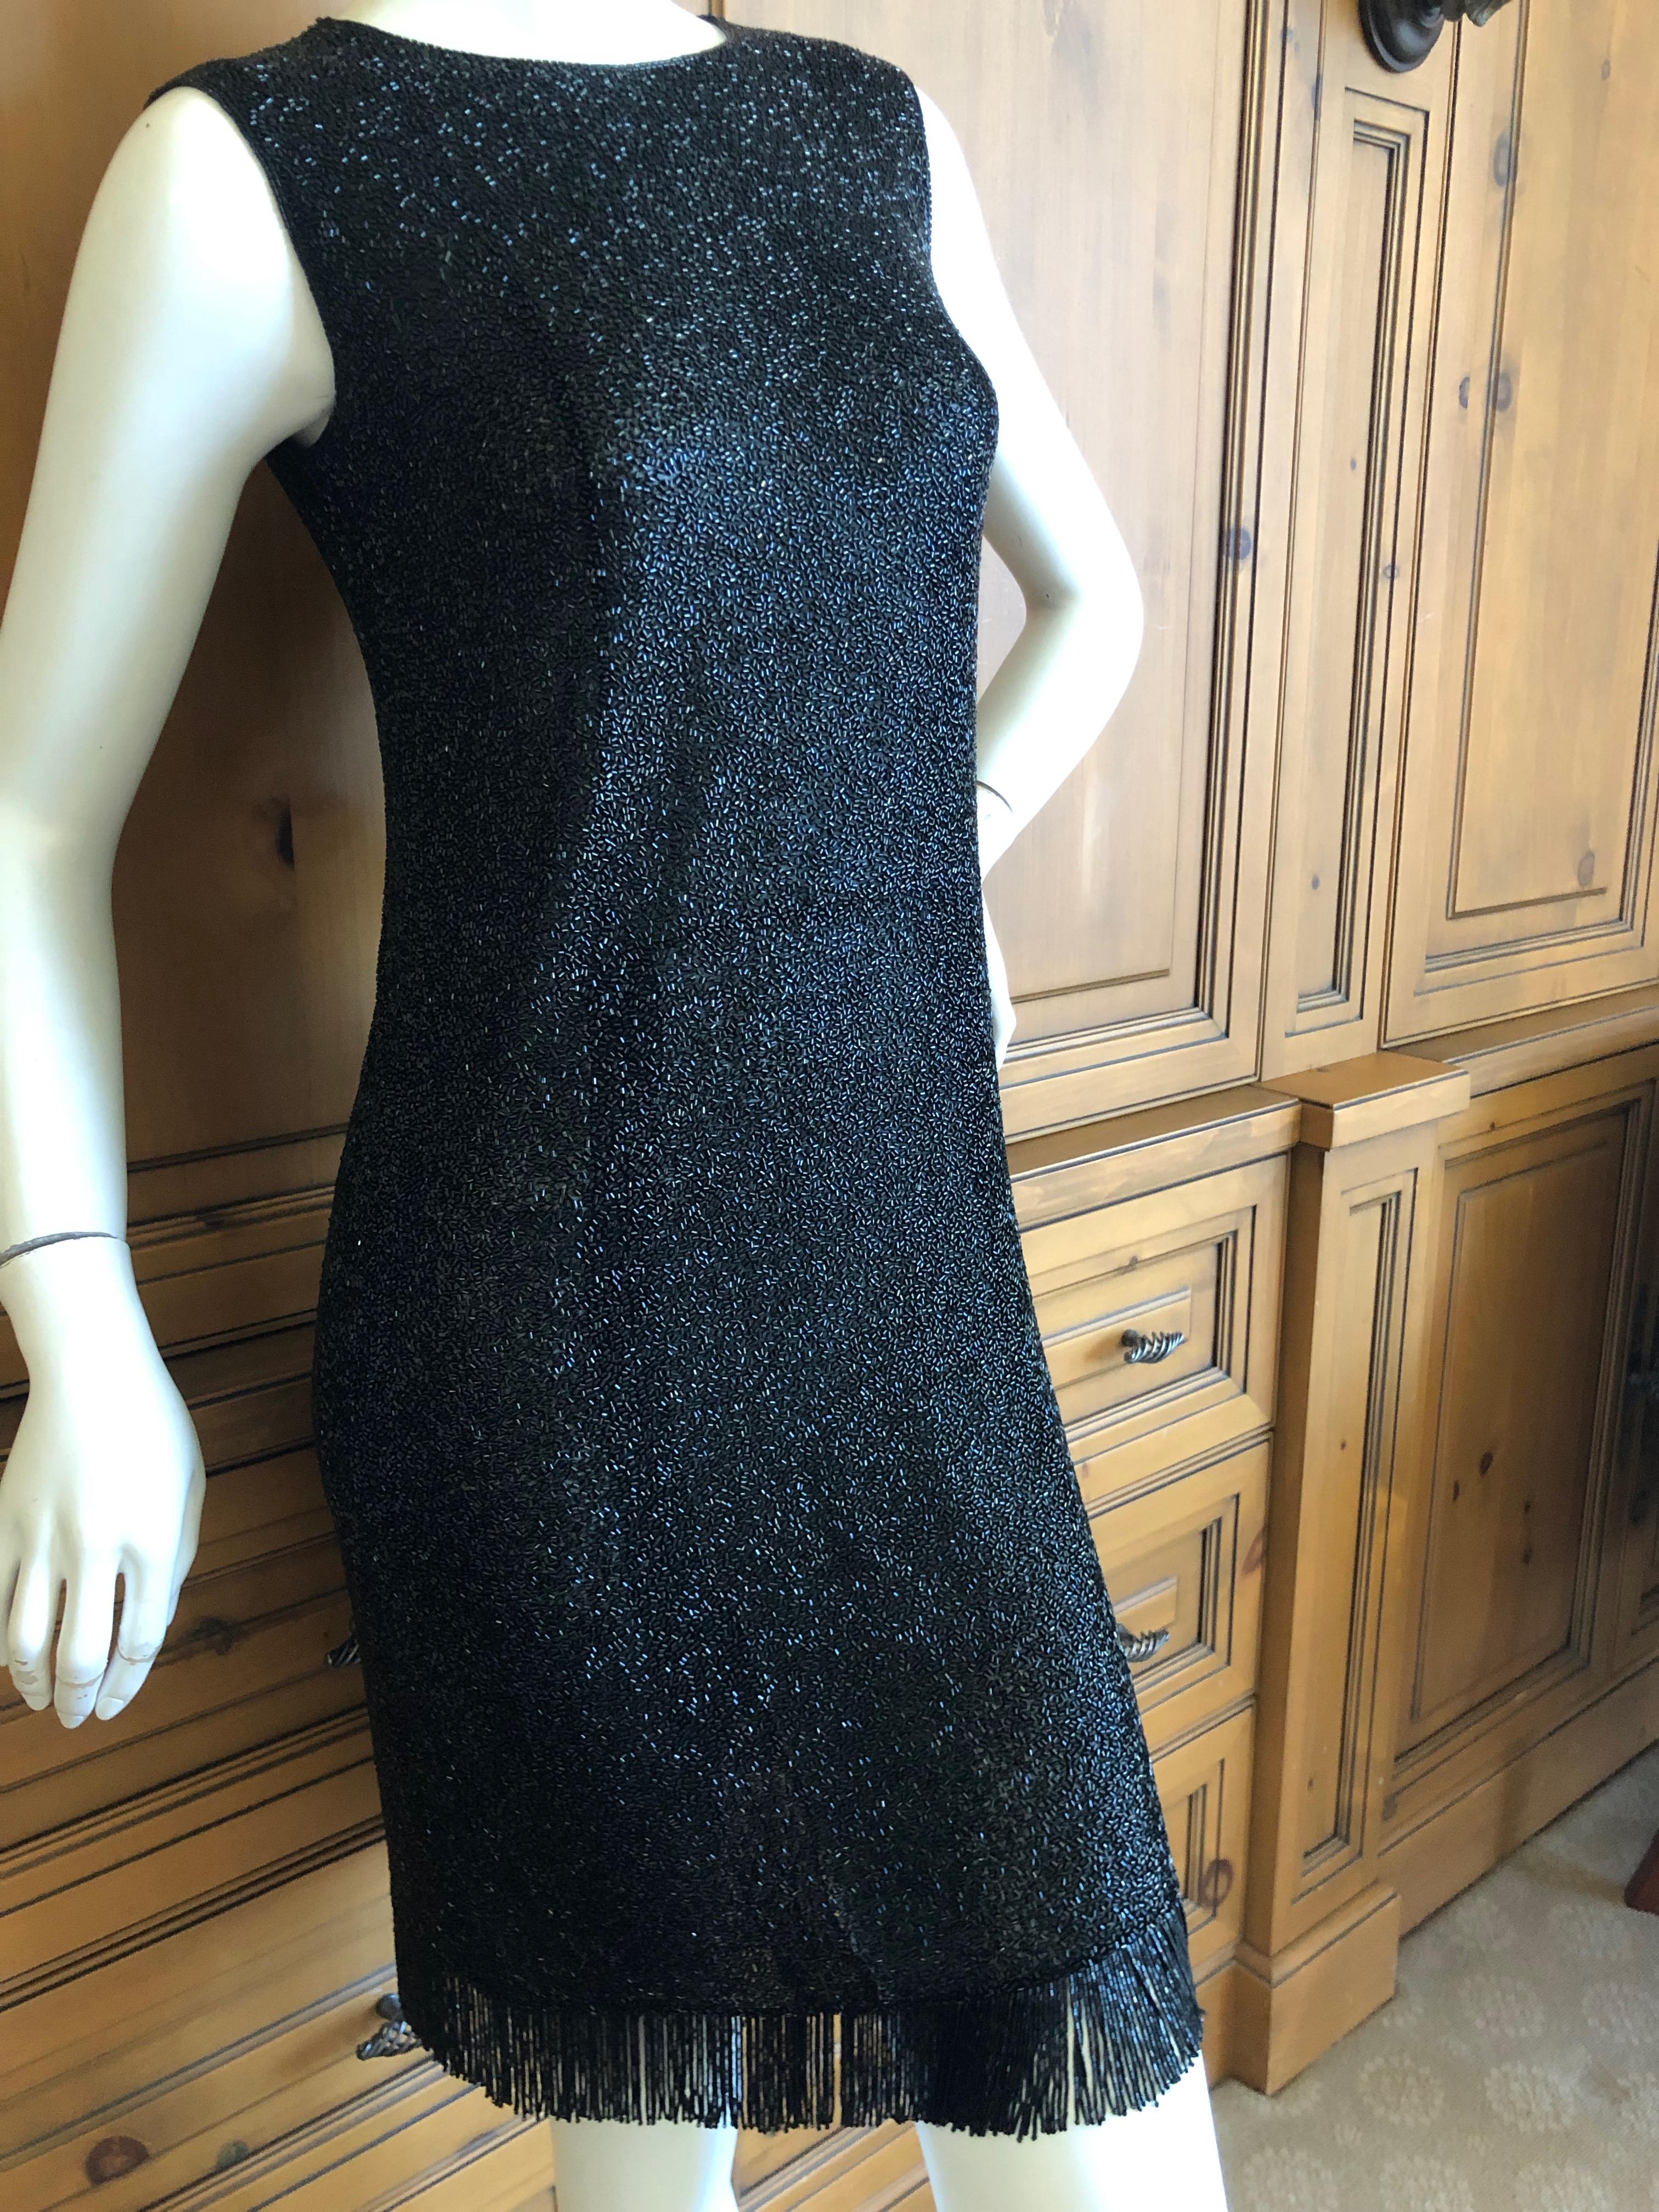 Norman Norell 1960's Black Dress Completely Embellished w Glass Beads & Fringe For Sale 3